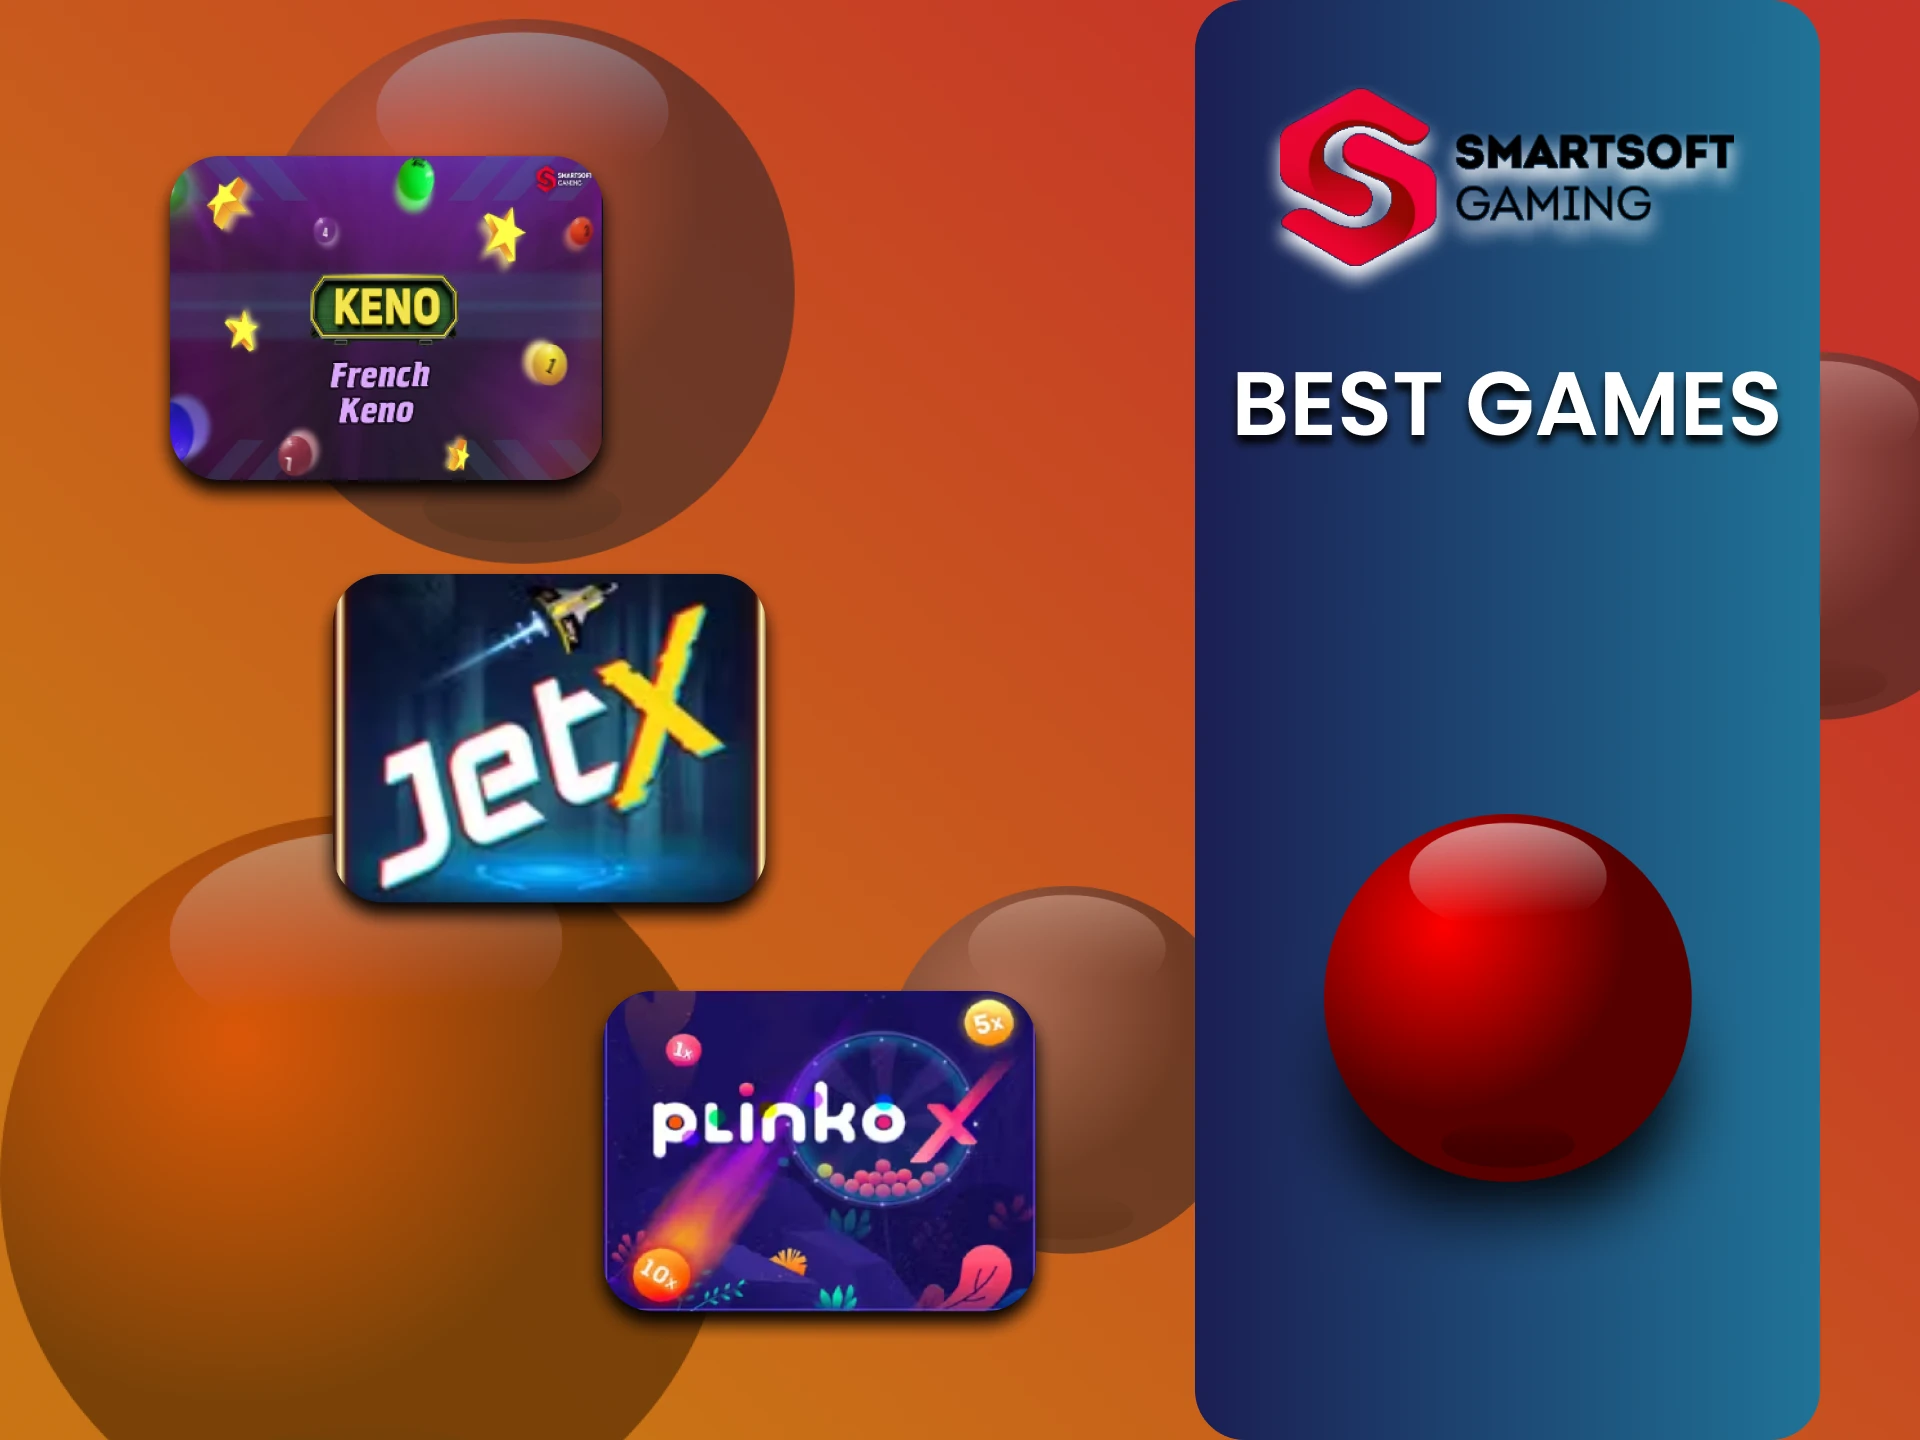 We will tell you about the best games from the Smartsoft provider.